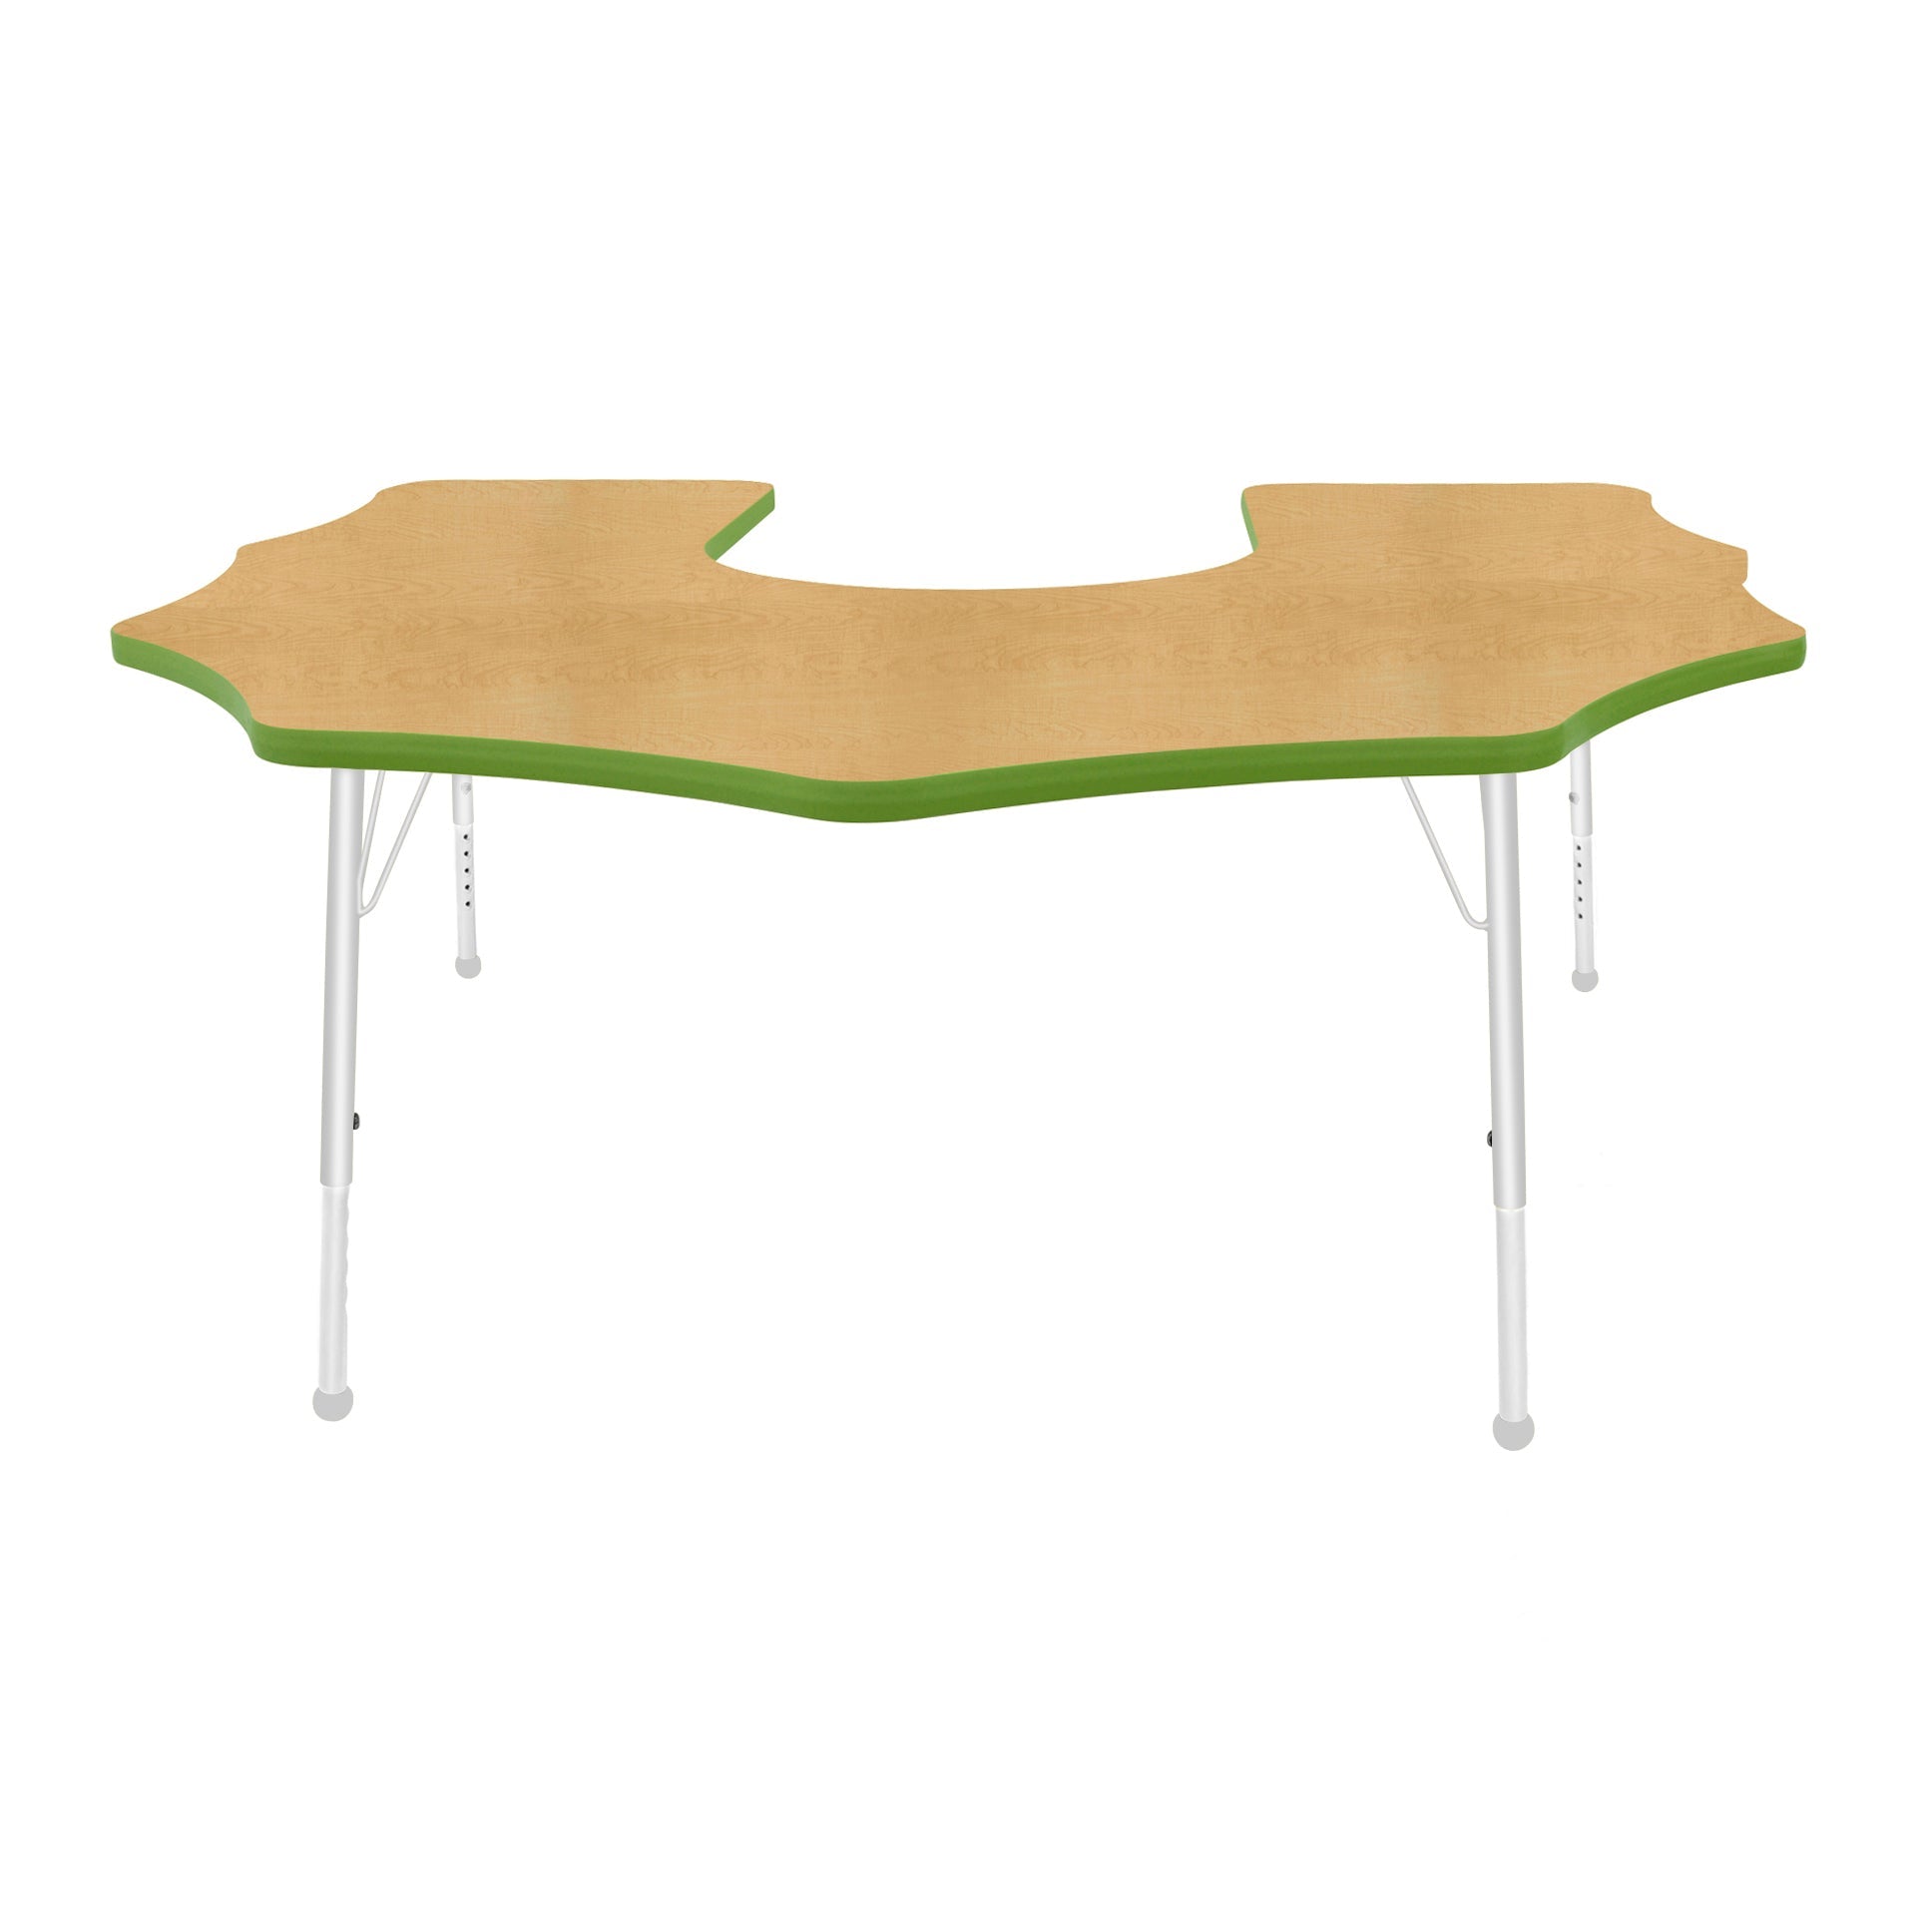 Mahar Creative Colors Scalloped Horseshoe Creative Colors Activity Table with Heavy Duty Laminate Top (60"W x 66"L x 22-30"H) - SchoolOutlet